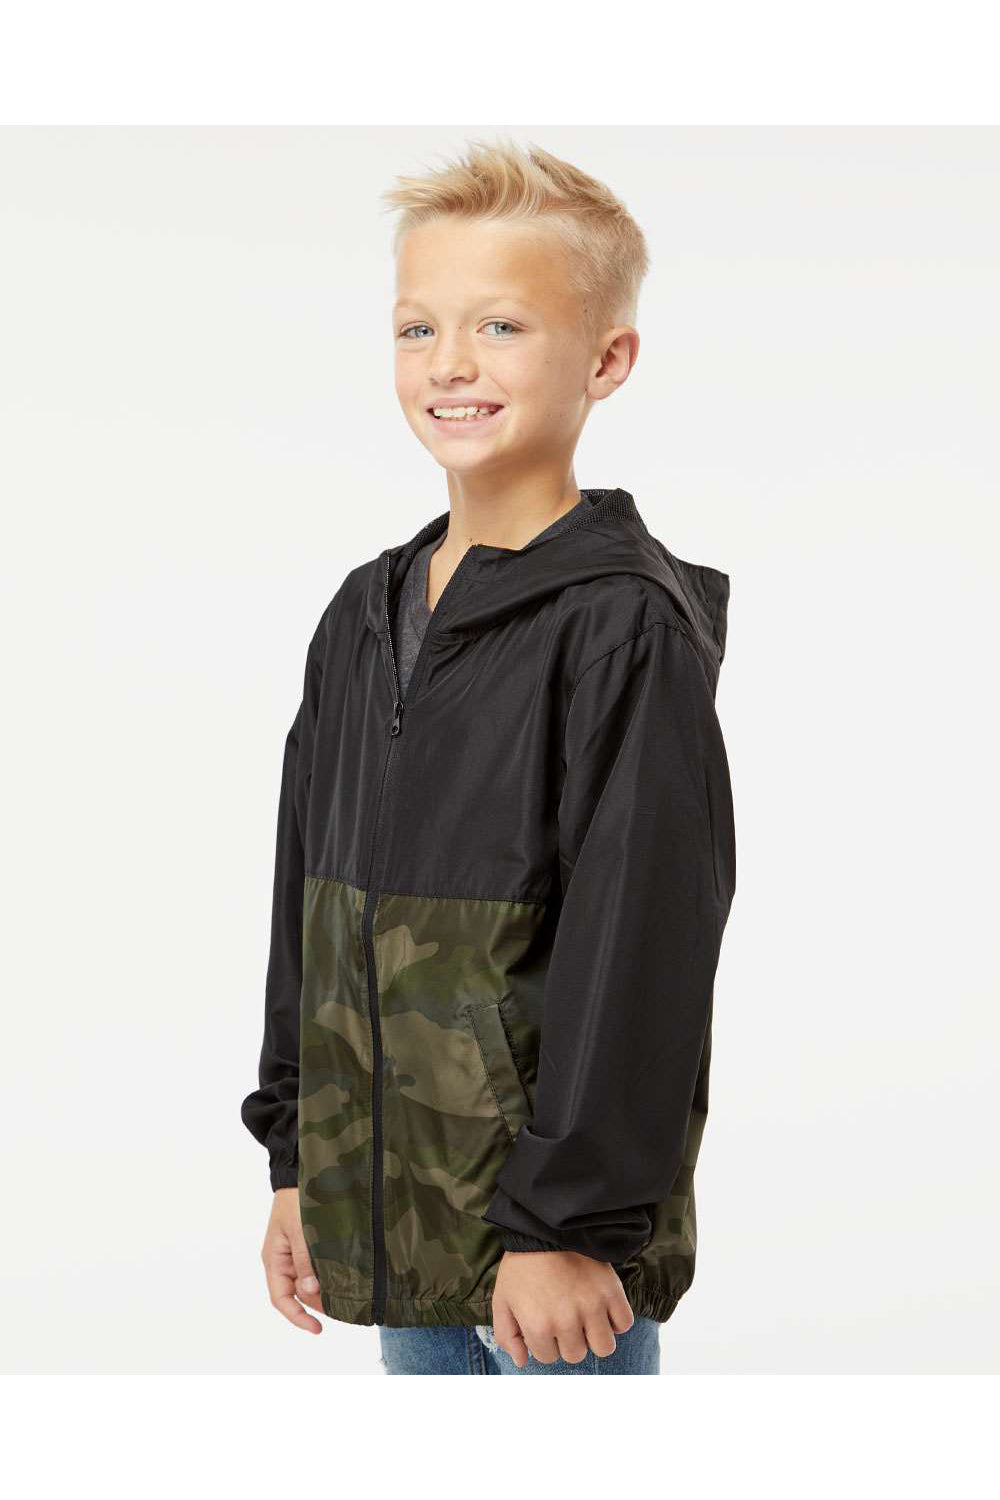 Independent Trading Co. EXP24YWZ Youth Full Zip Windbreaker Hooded Jacket Black/Forest Green Camo Model Side